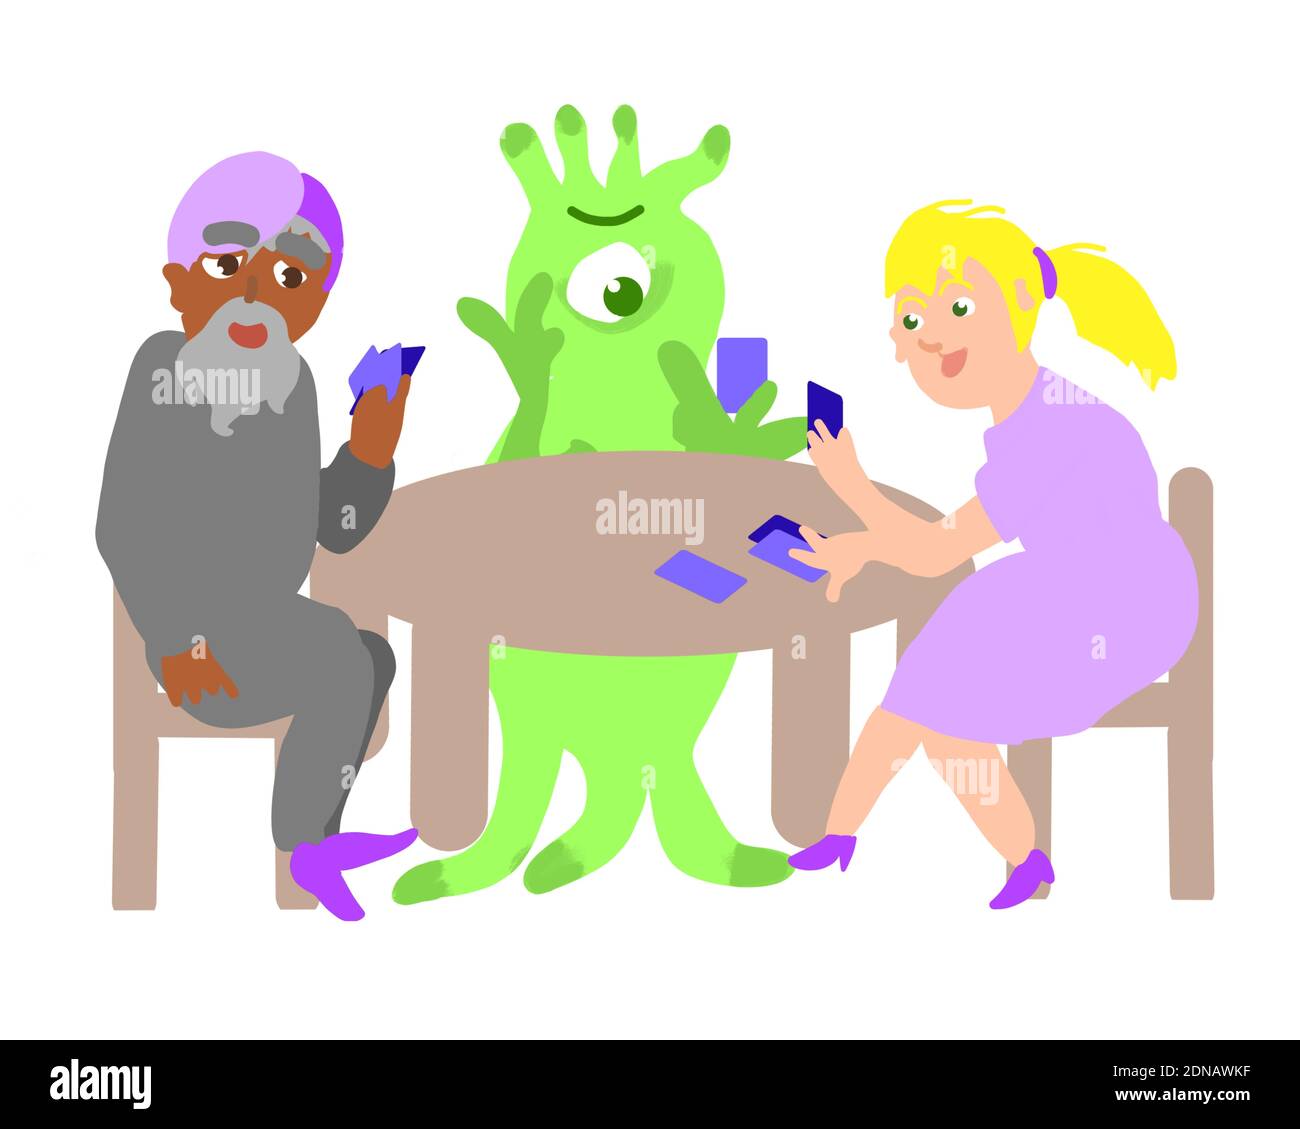 Playing Cards With Aliens Stock Photo